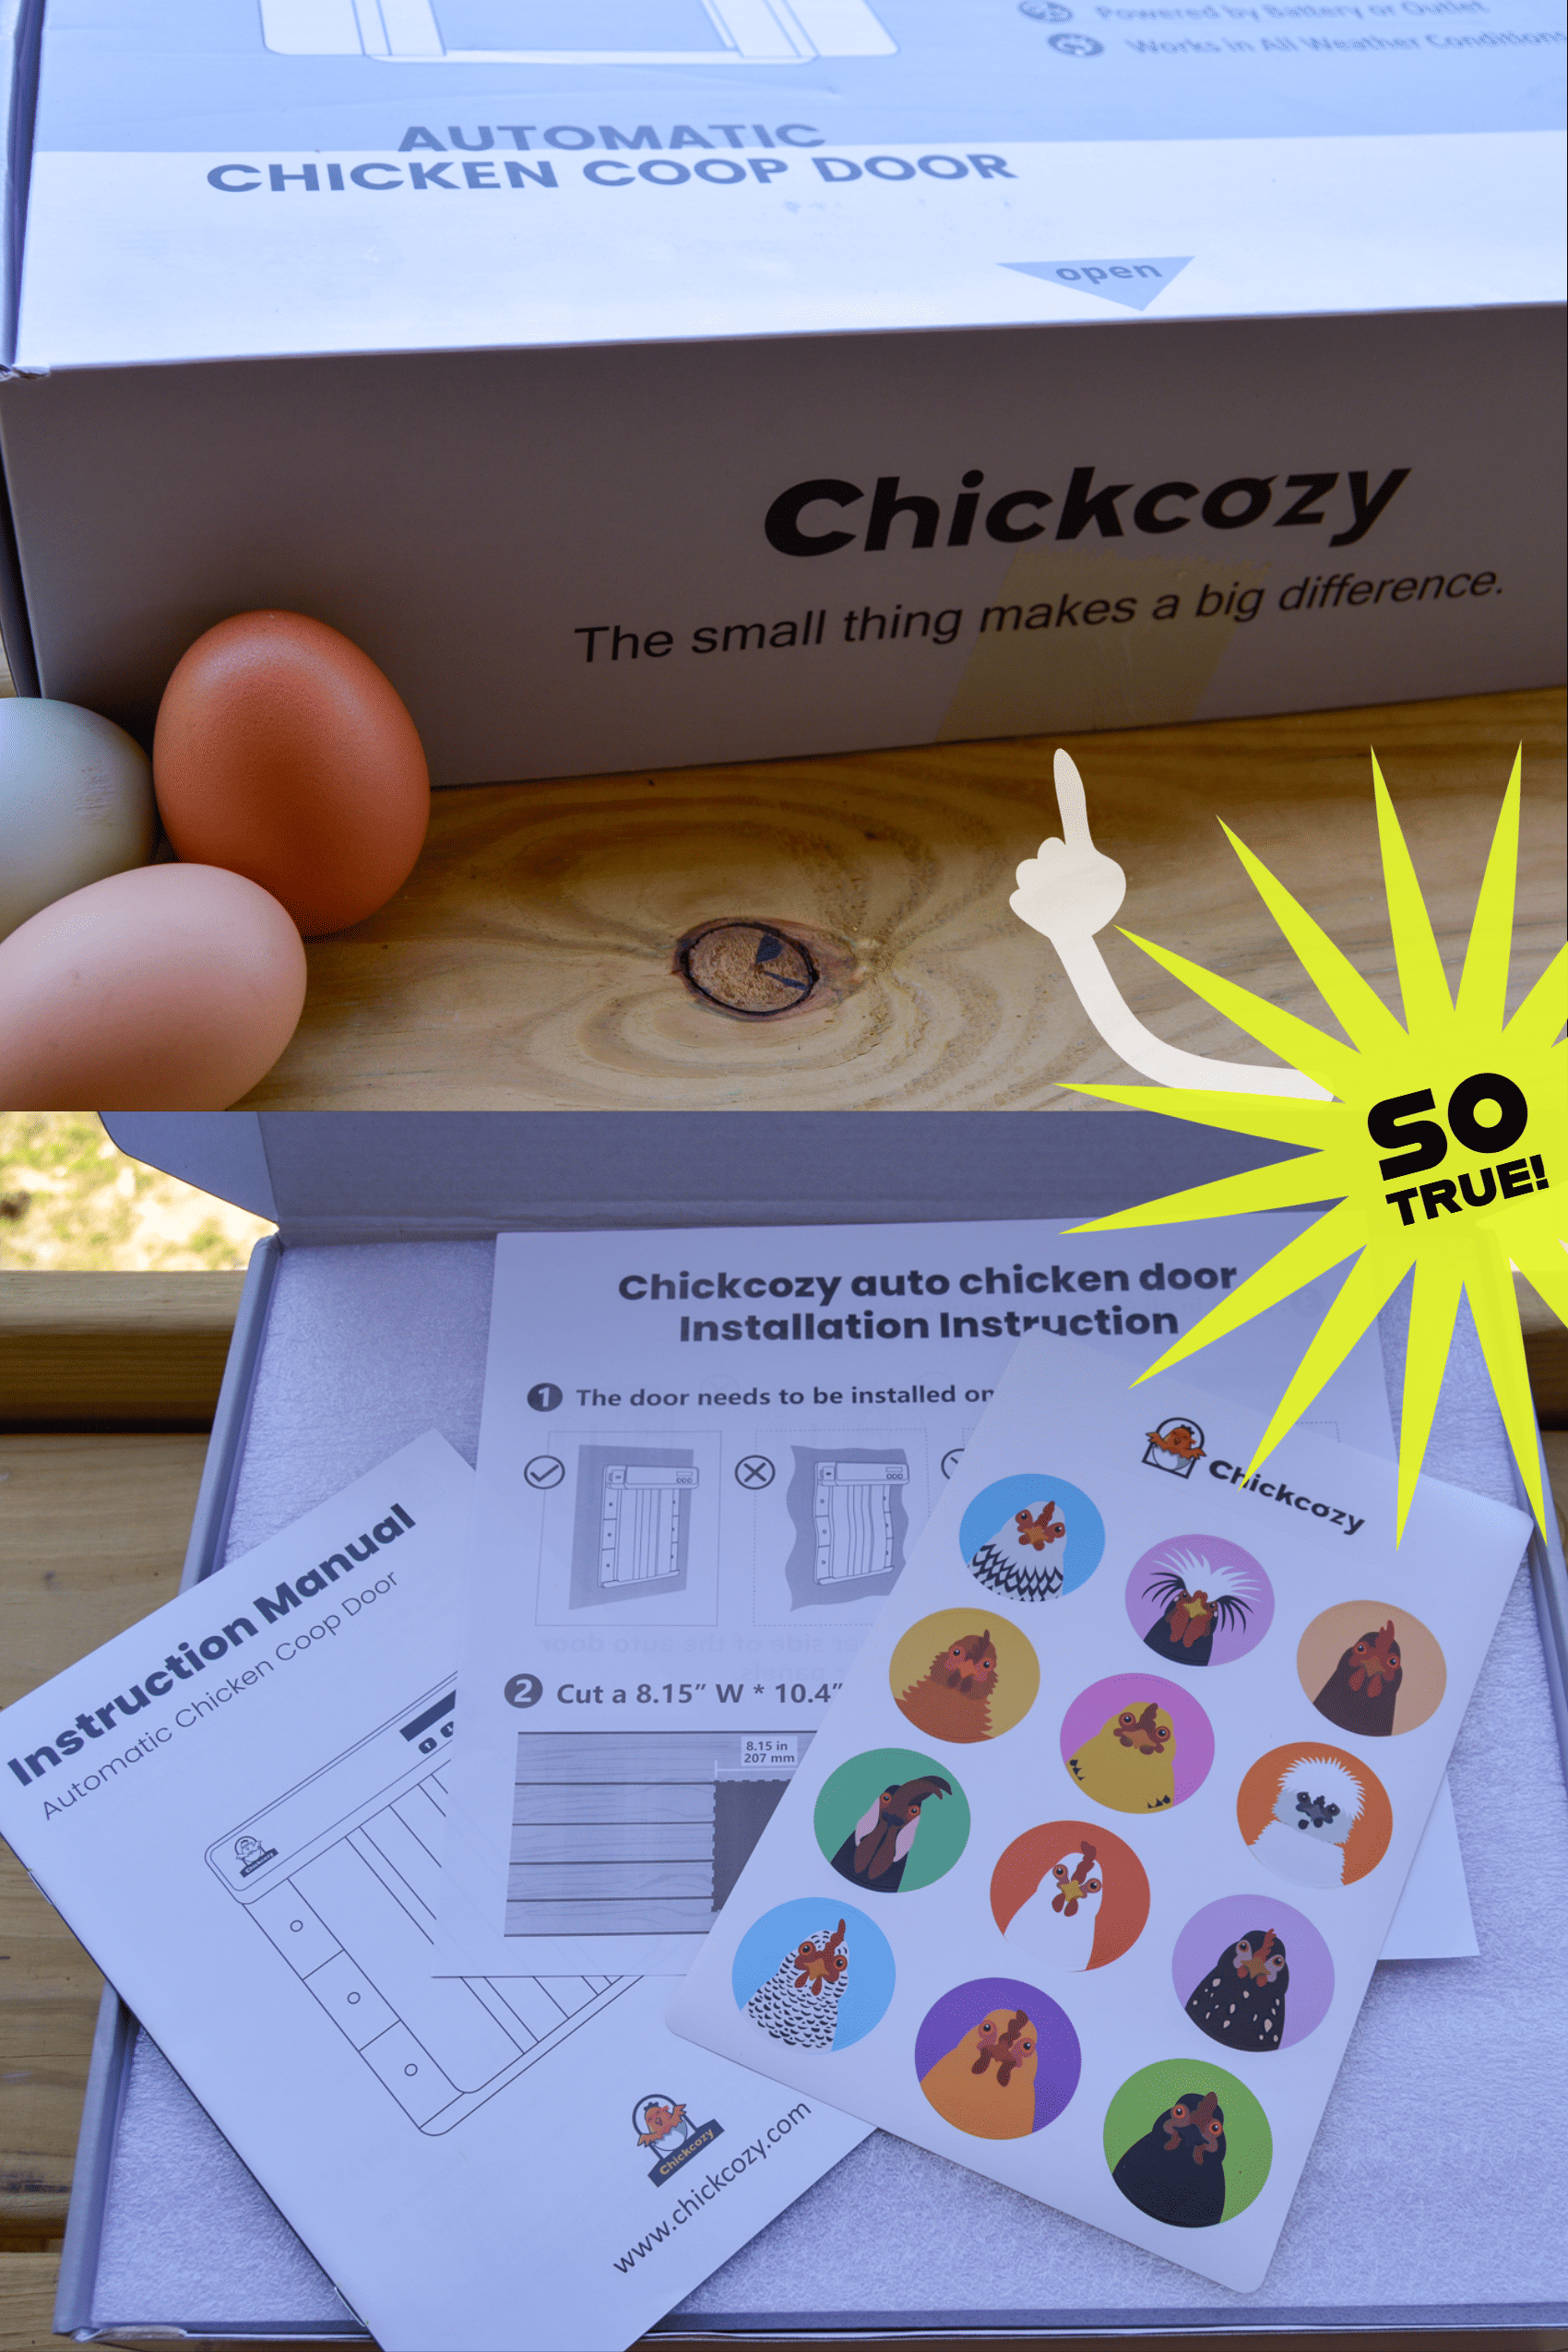 Chickcozy Auto Door Box with saying "The small thing makes a big difference" showing instructions and stickers that come with the door.